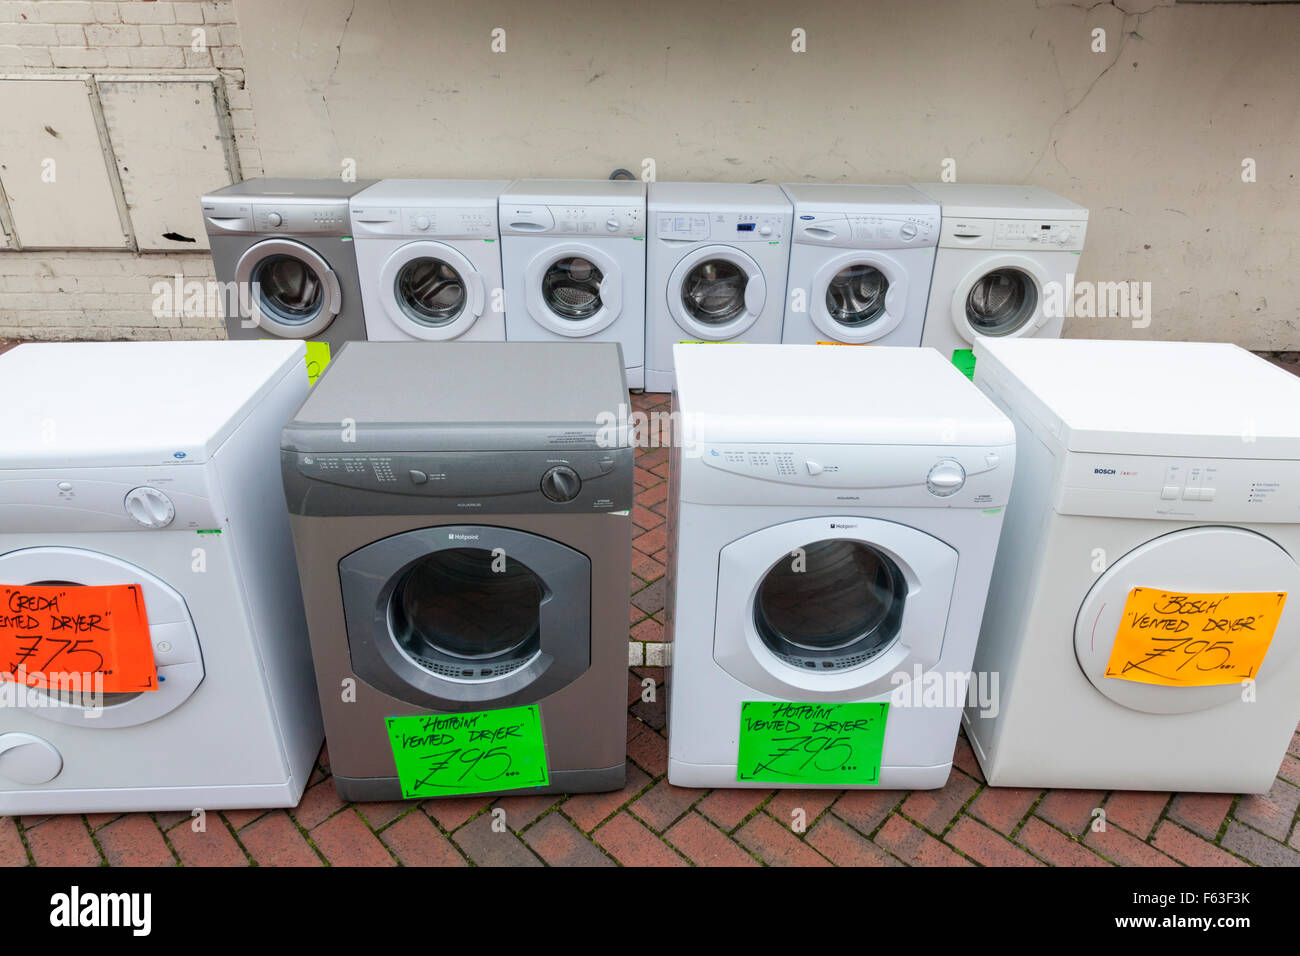 Second hand white goods. Old and previously used washing machine and tumble dryer  sale on a UK town centre street. Nottinghamshire, England, UK Stock Photo -  Alamy